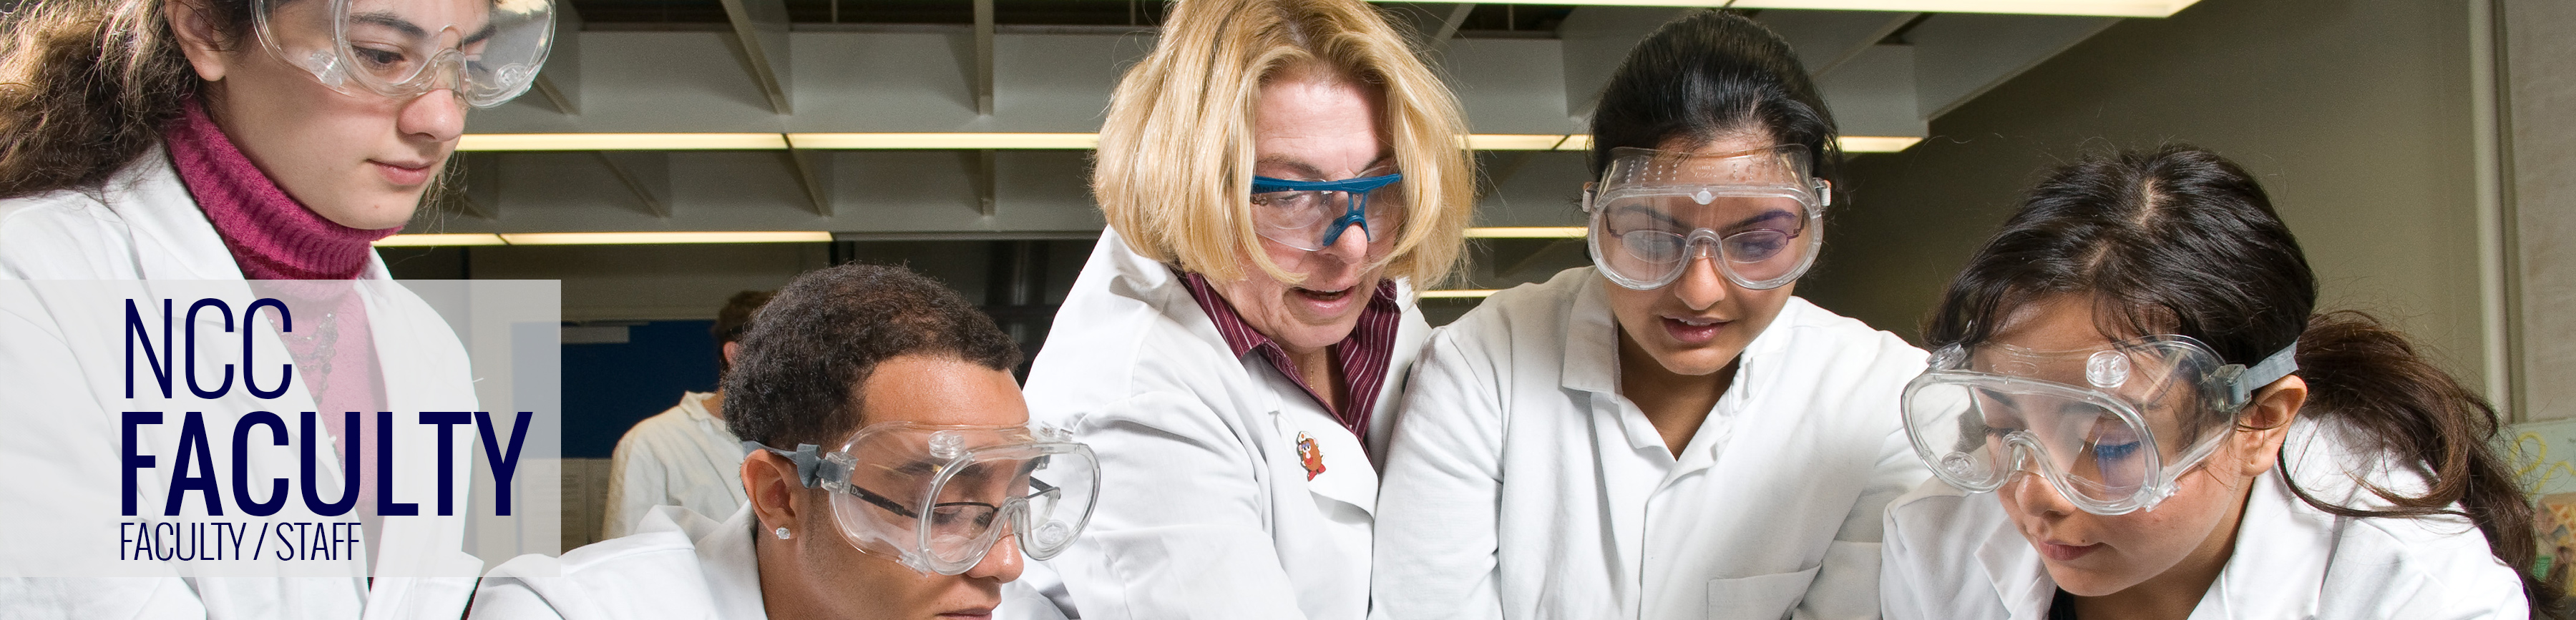 NCC faculty / staff. Photo of faculty member and students in a lab.